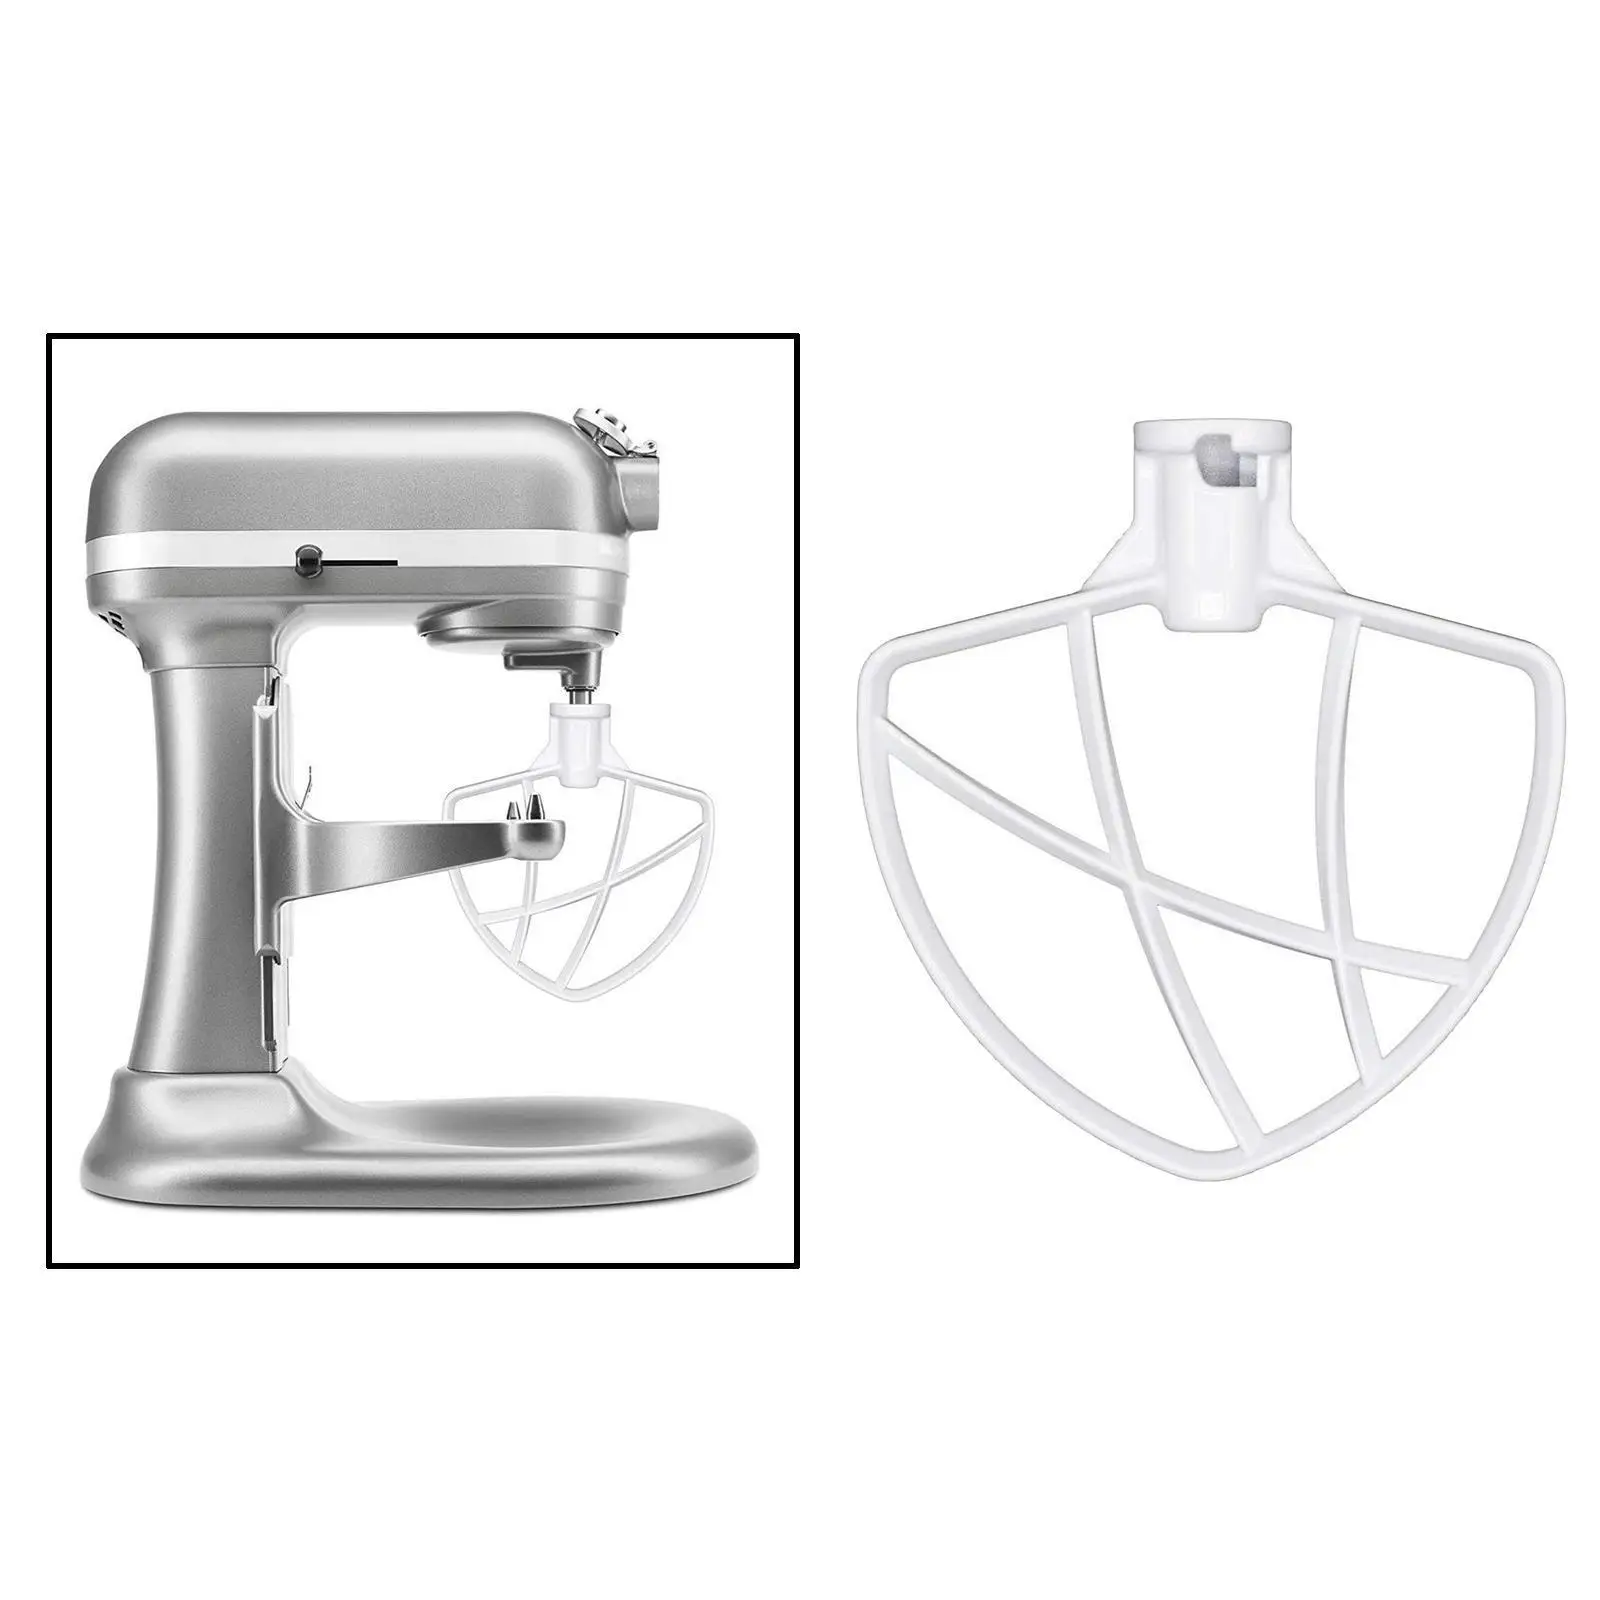 6 Qt Kitchen Coated Flat Beater Stand Mixer Attachments Household Cooking